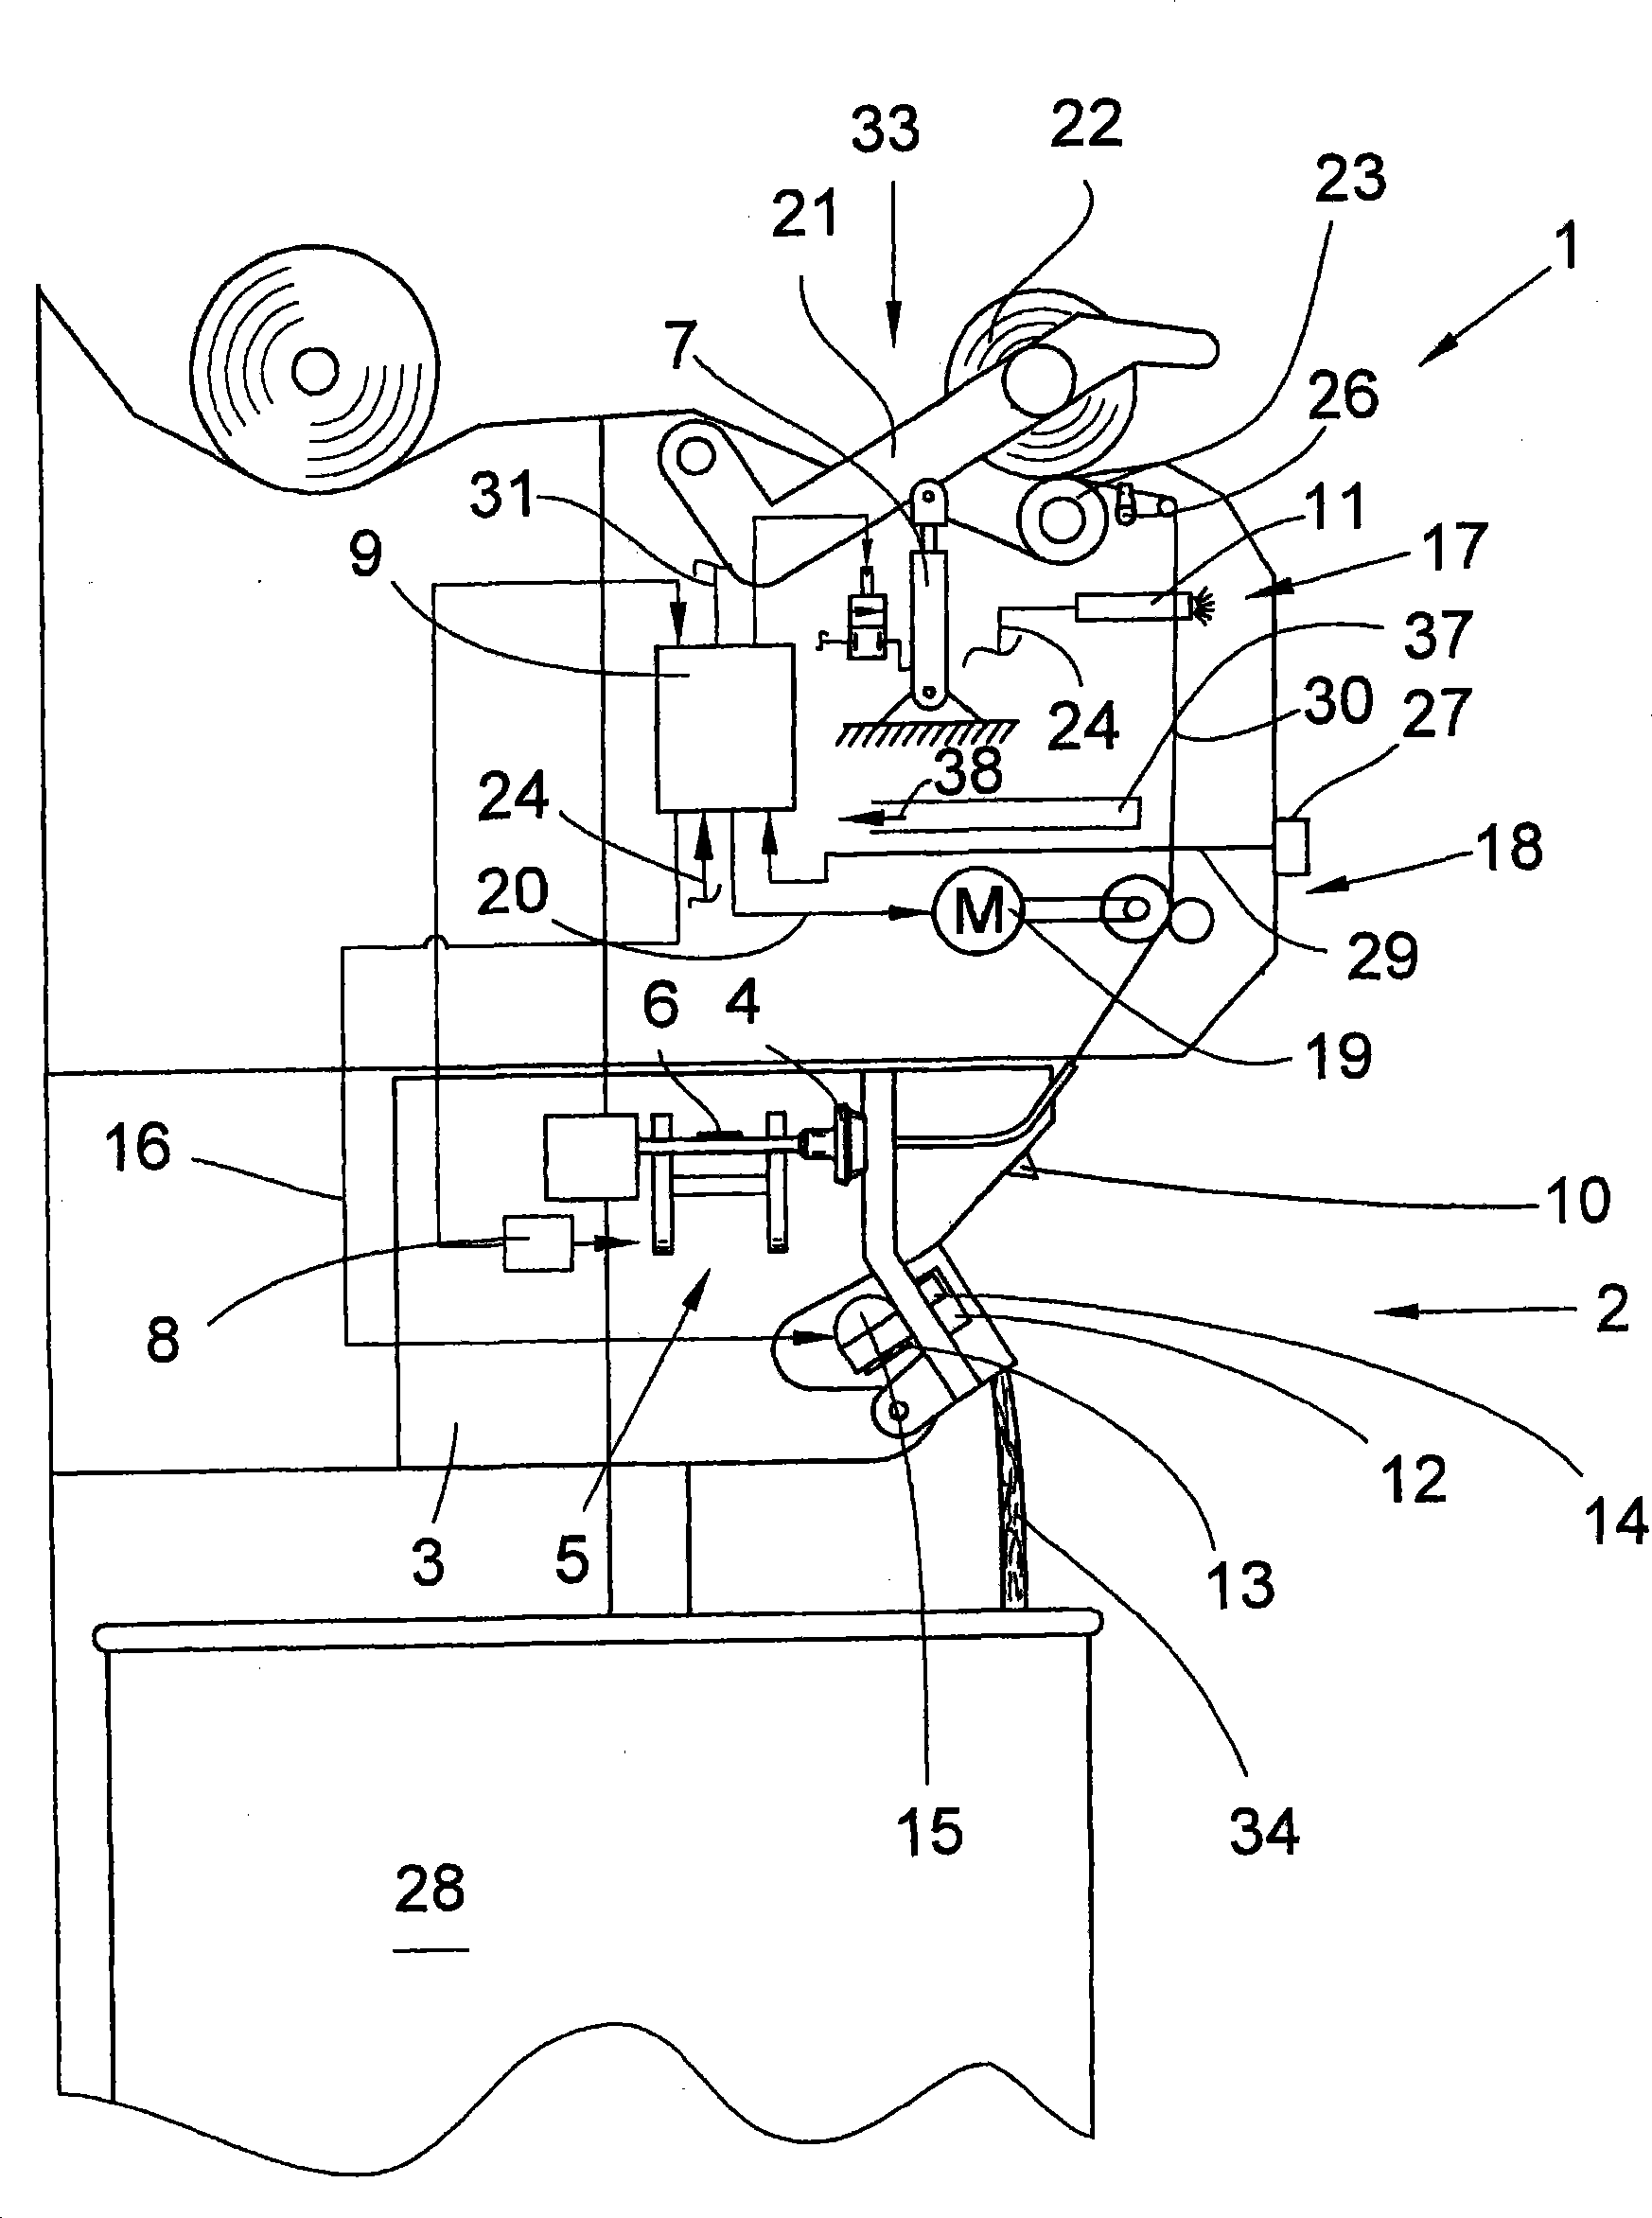 Method for operating semi-automatic open-end spinning machine workstation and workstation for performing the method